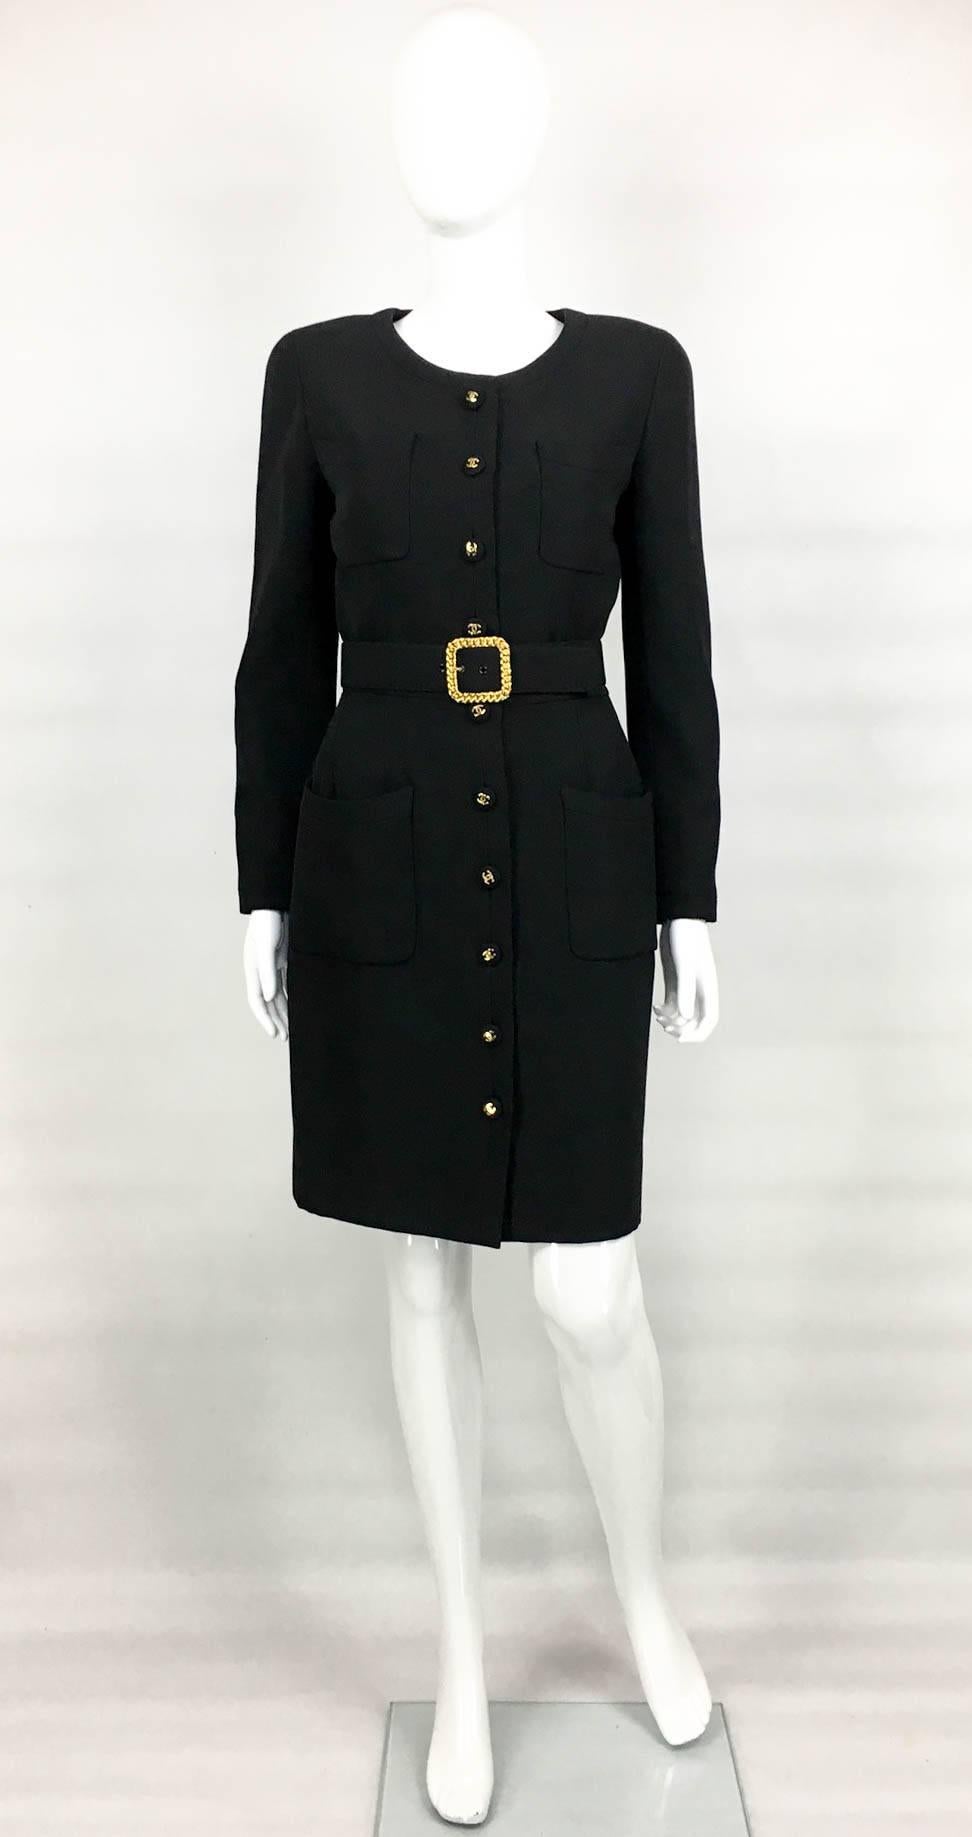 Chic Chanel Vintage Wool Gabardine Belted Black Dress. This stylish lightweight wool dress by Chanel dates from 1992 and features covered buttons with gilt ‘CC’ logos on top. With long sleeves and round neckline, it has 4 front pockets (2 on the